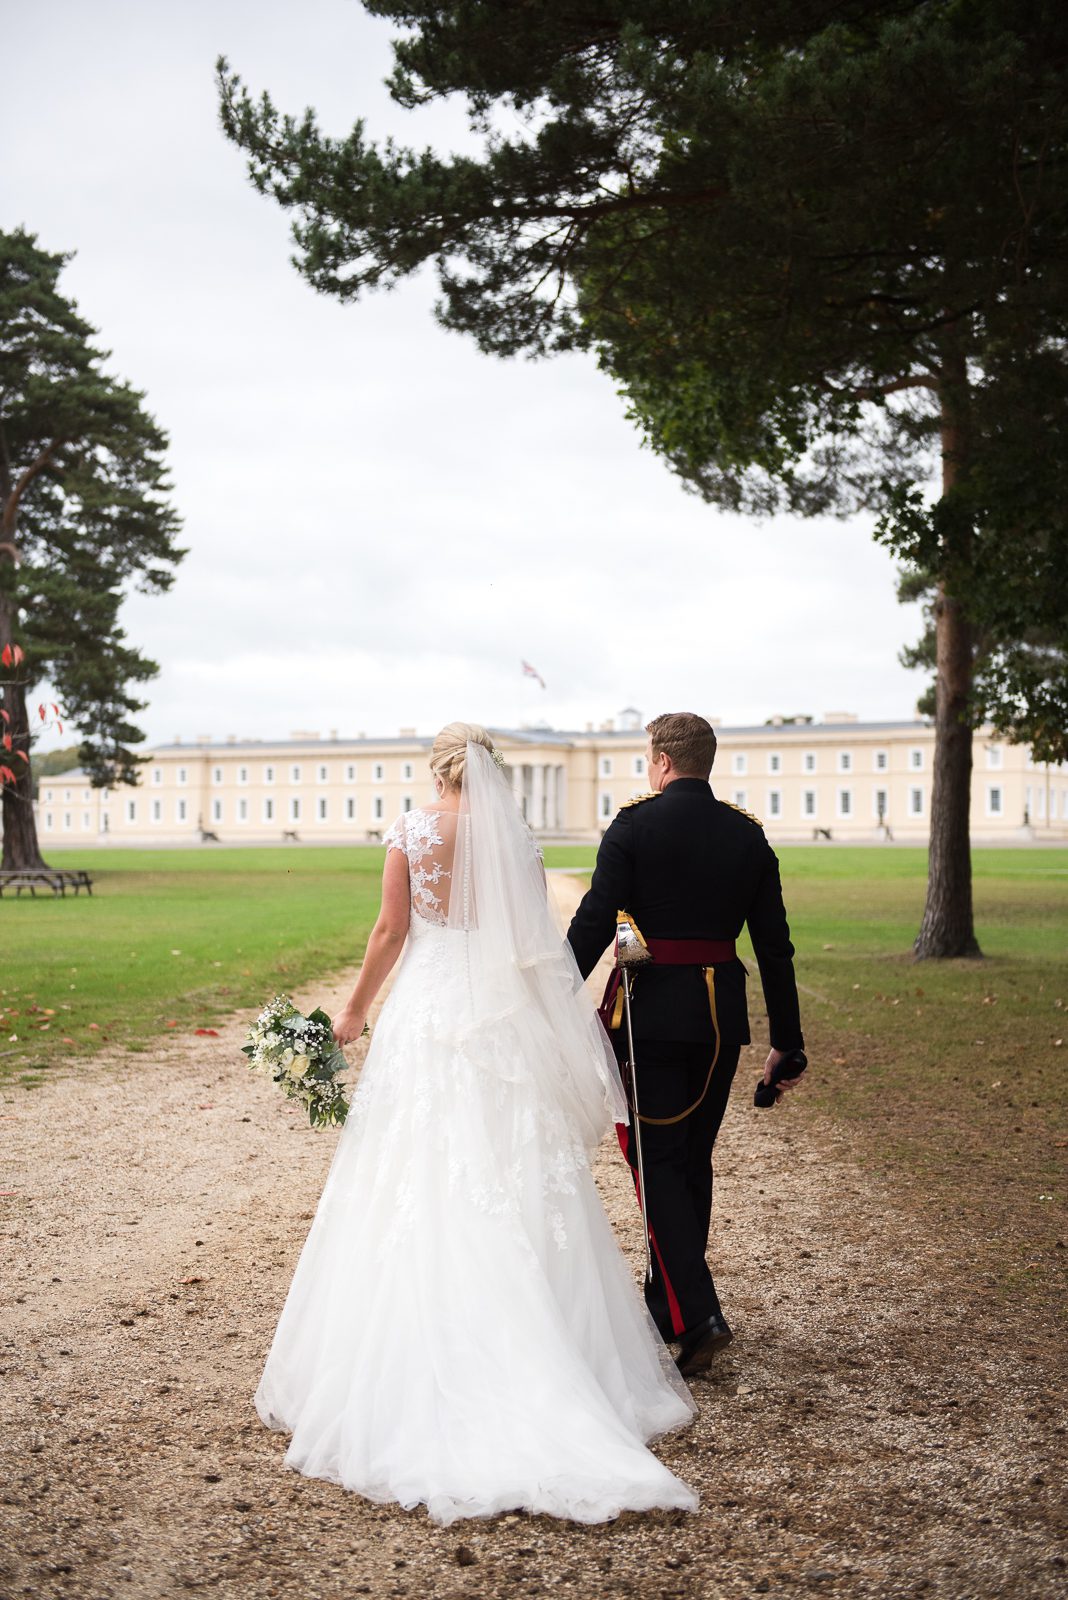 A military wedding portrait in the grounds of the RMAS.